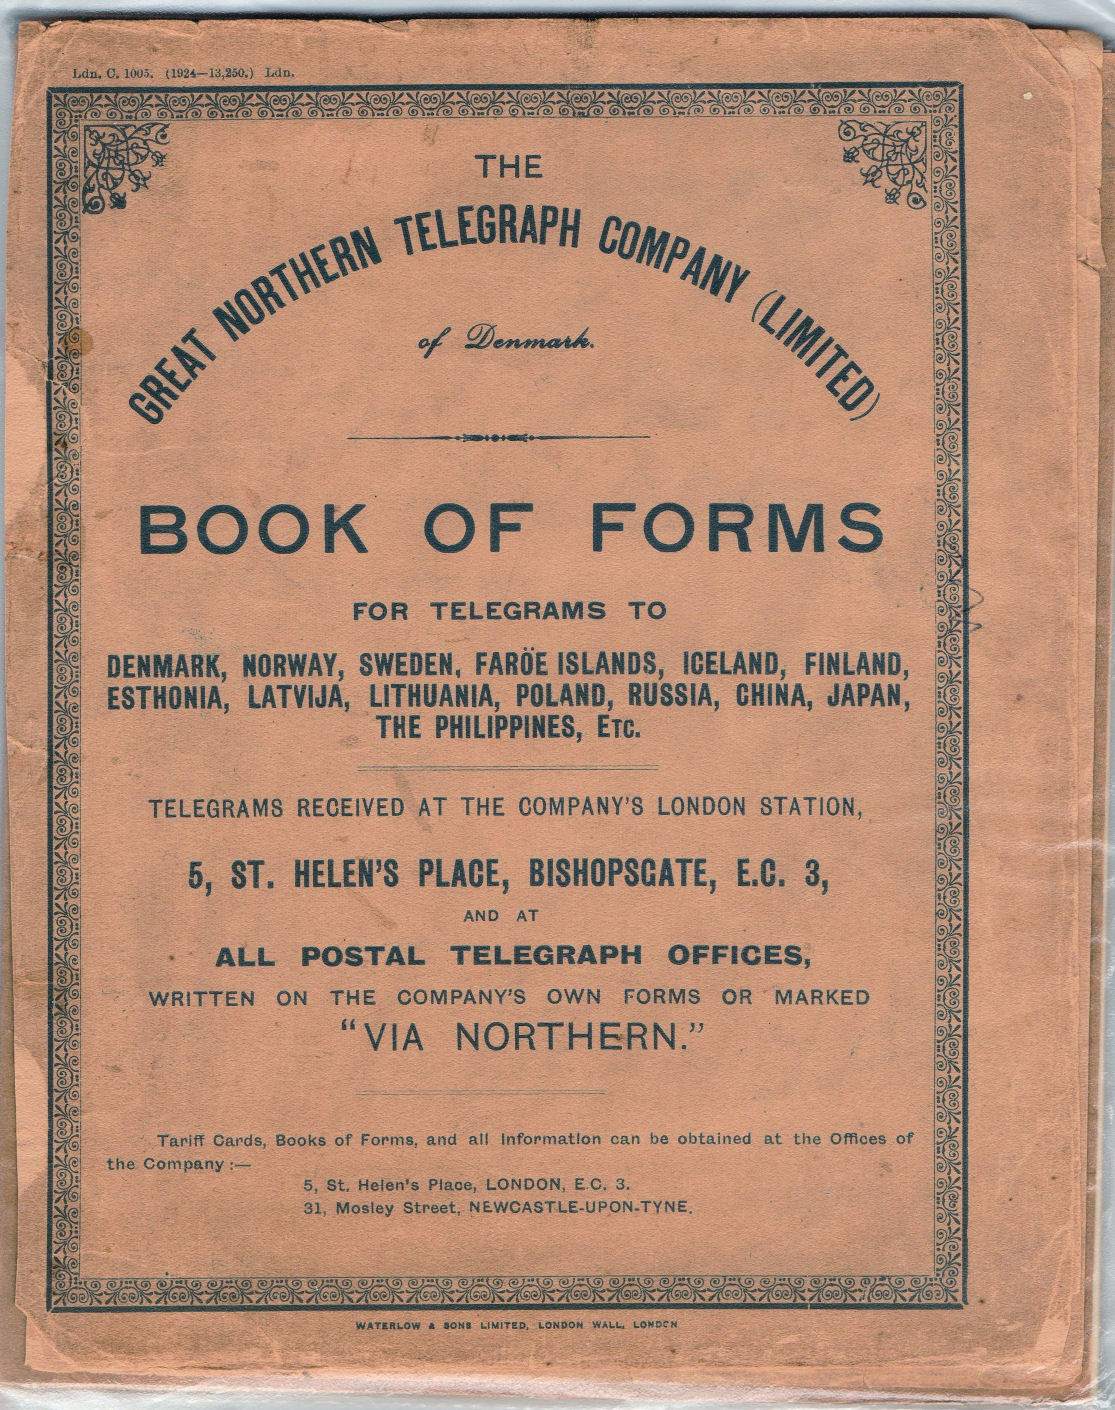 London book of forms of 1924